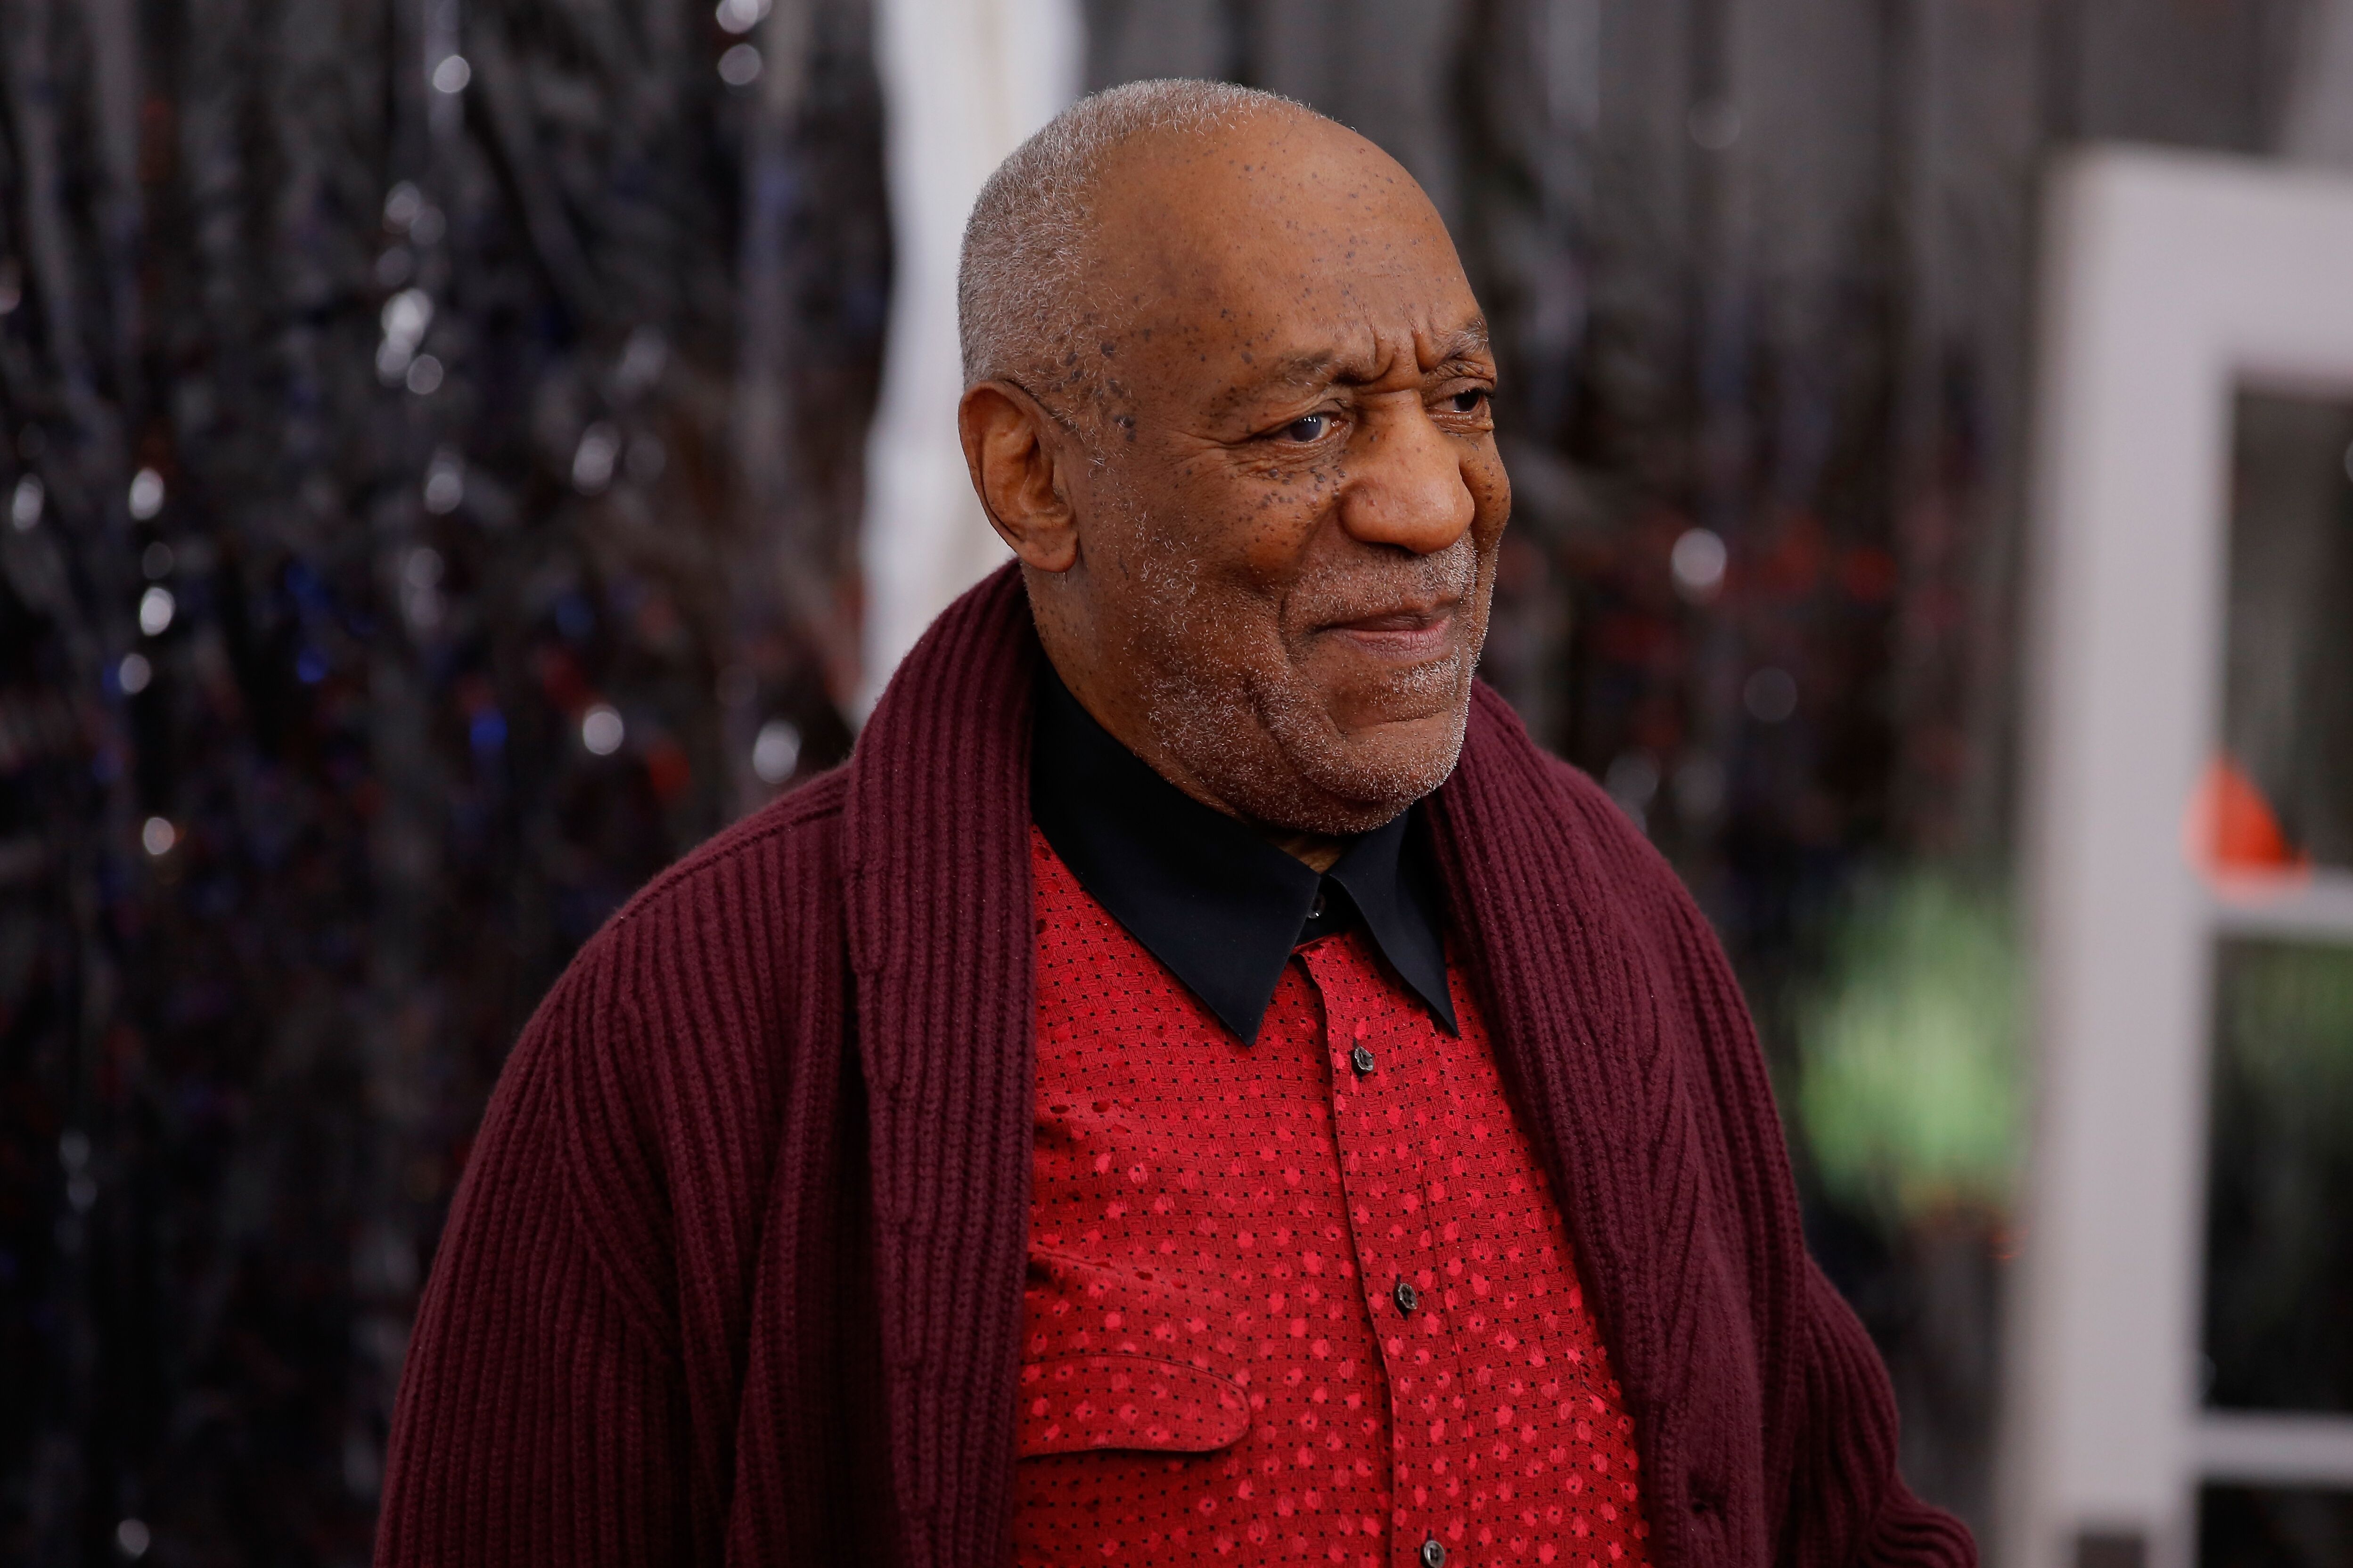 Bill Cosby at the 7th annual "Stand Up For Heroes" event at Madison Square Garden on November 6, 2013 in New York City | Photo: Getty Images